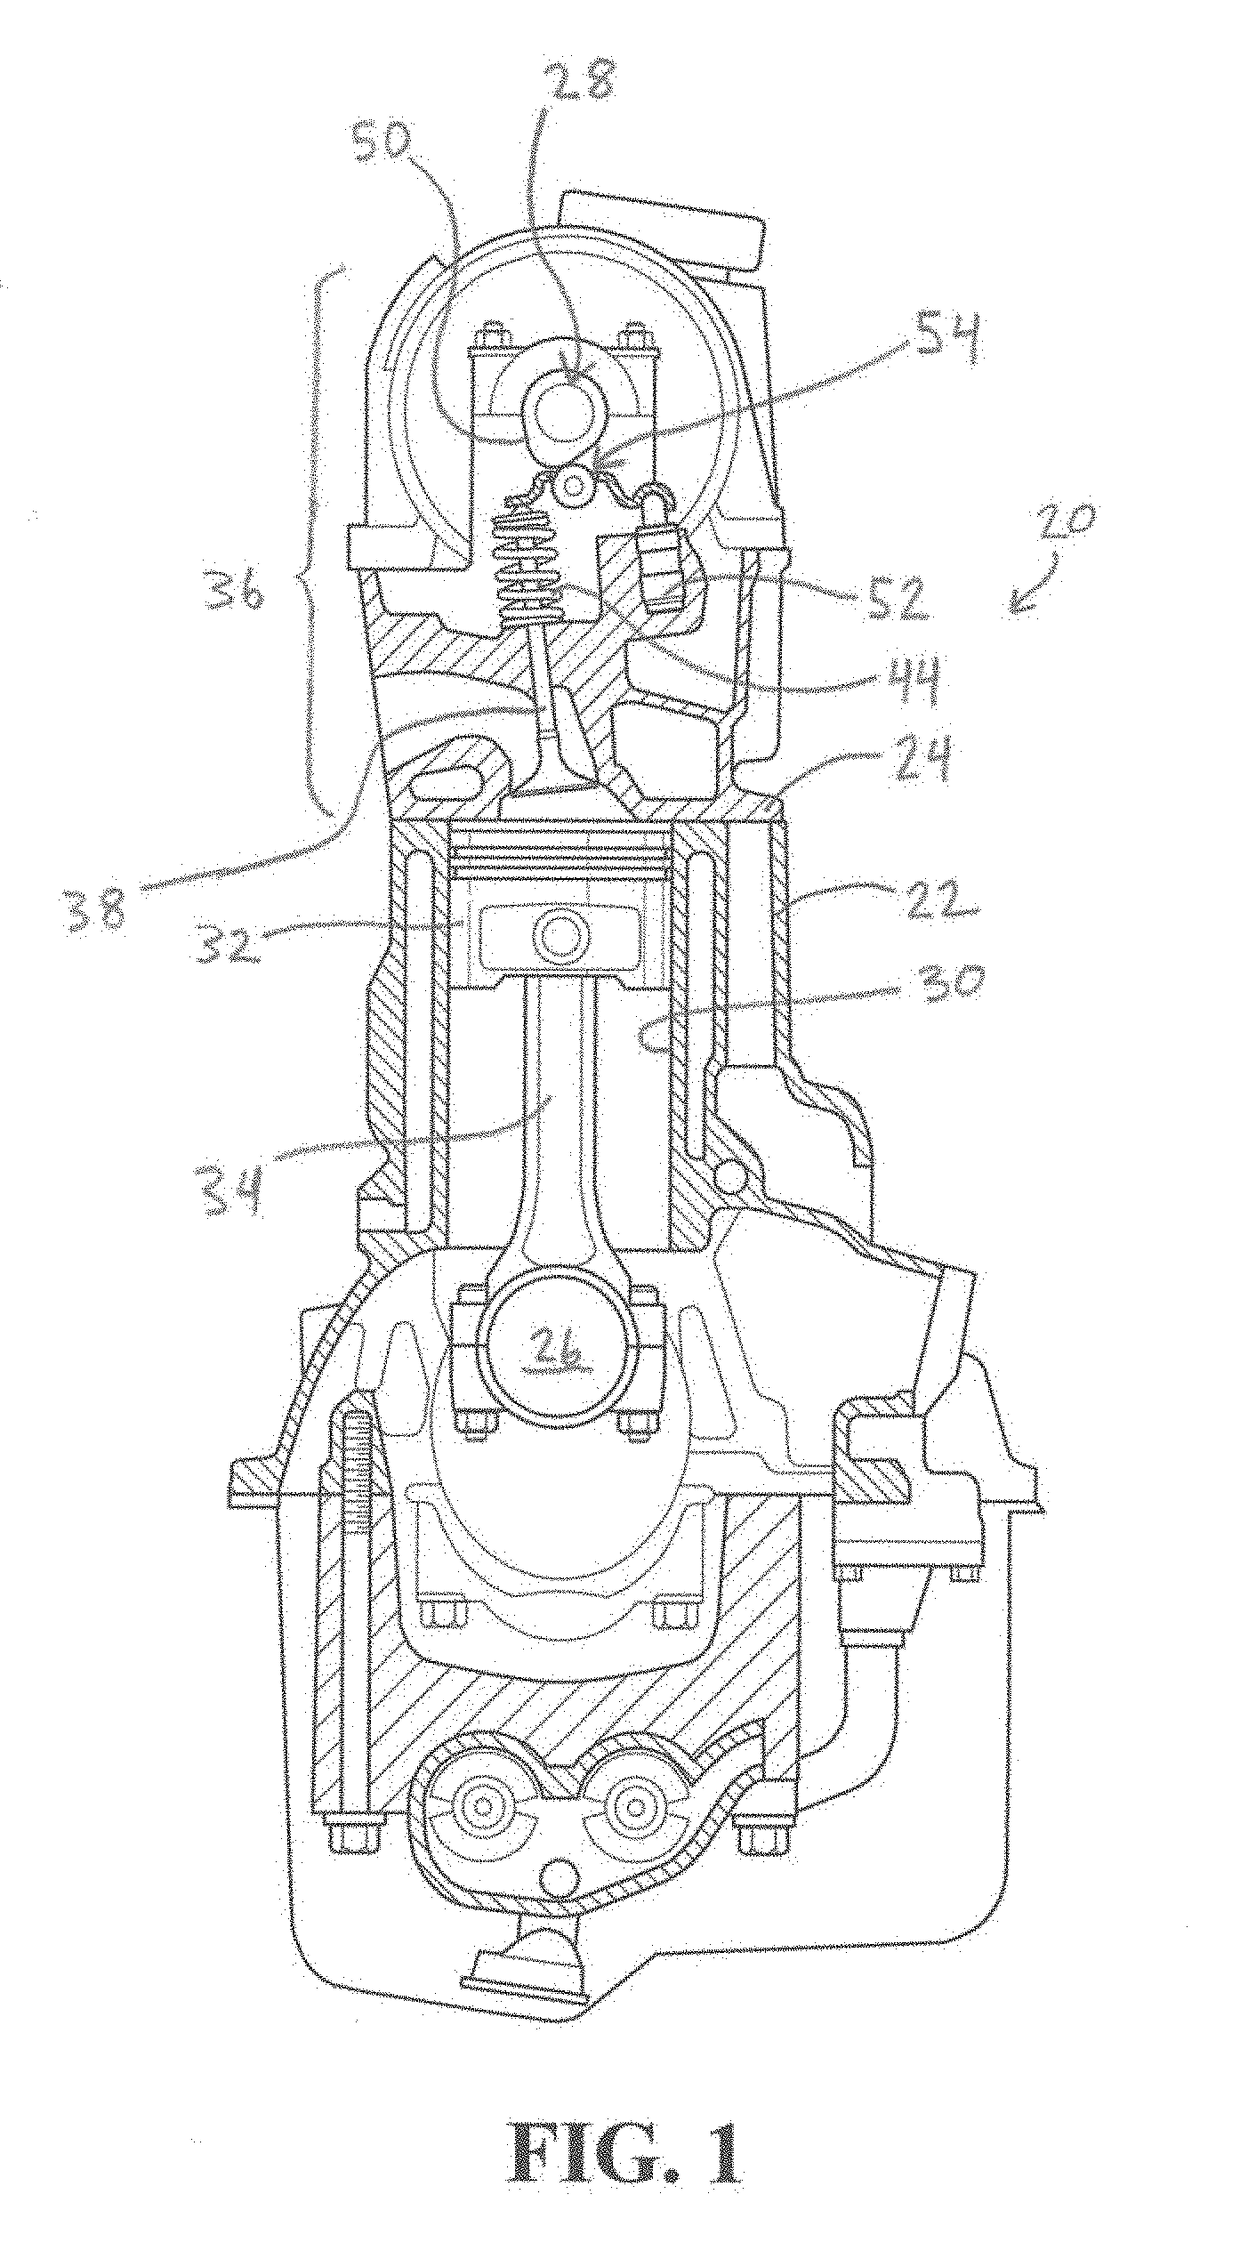 Finger follower assembly for use in a valvetrain of an internal combustion engine